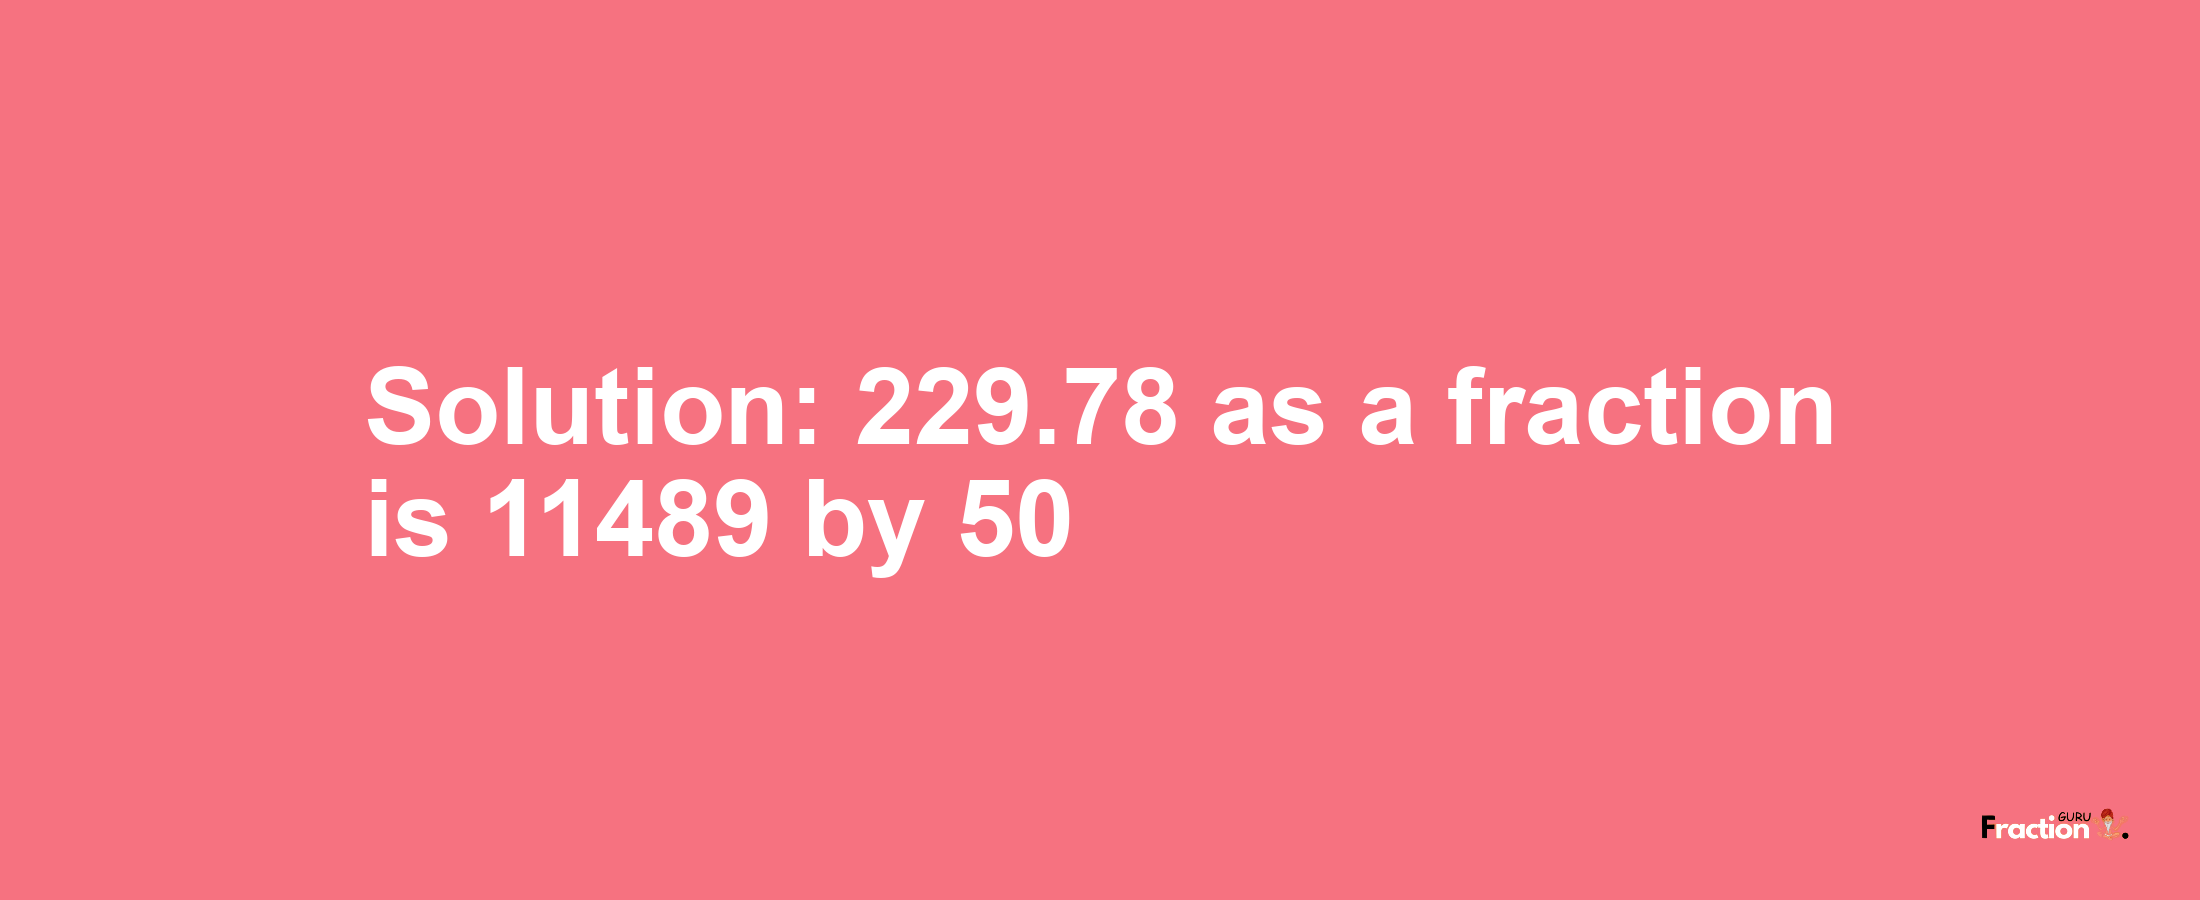 Solution:229.78 as a fraction is 11489/50